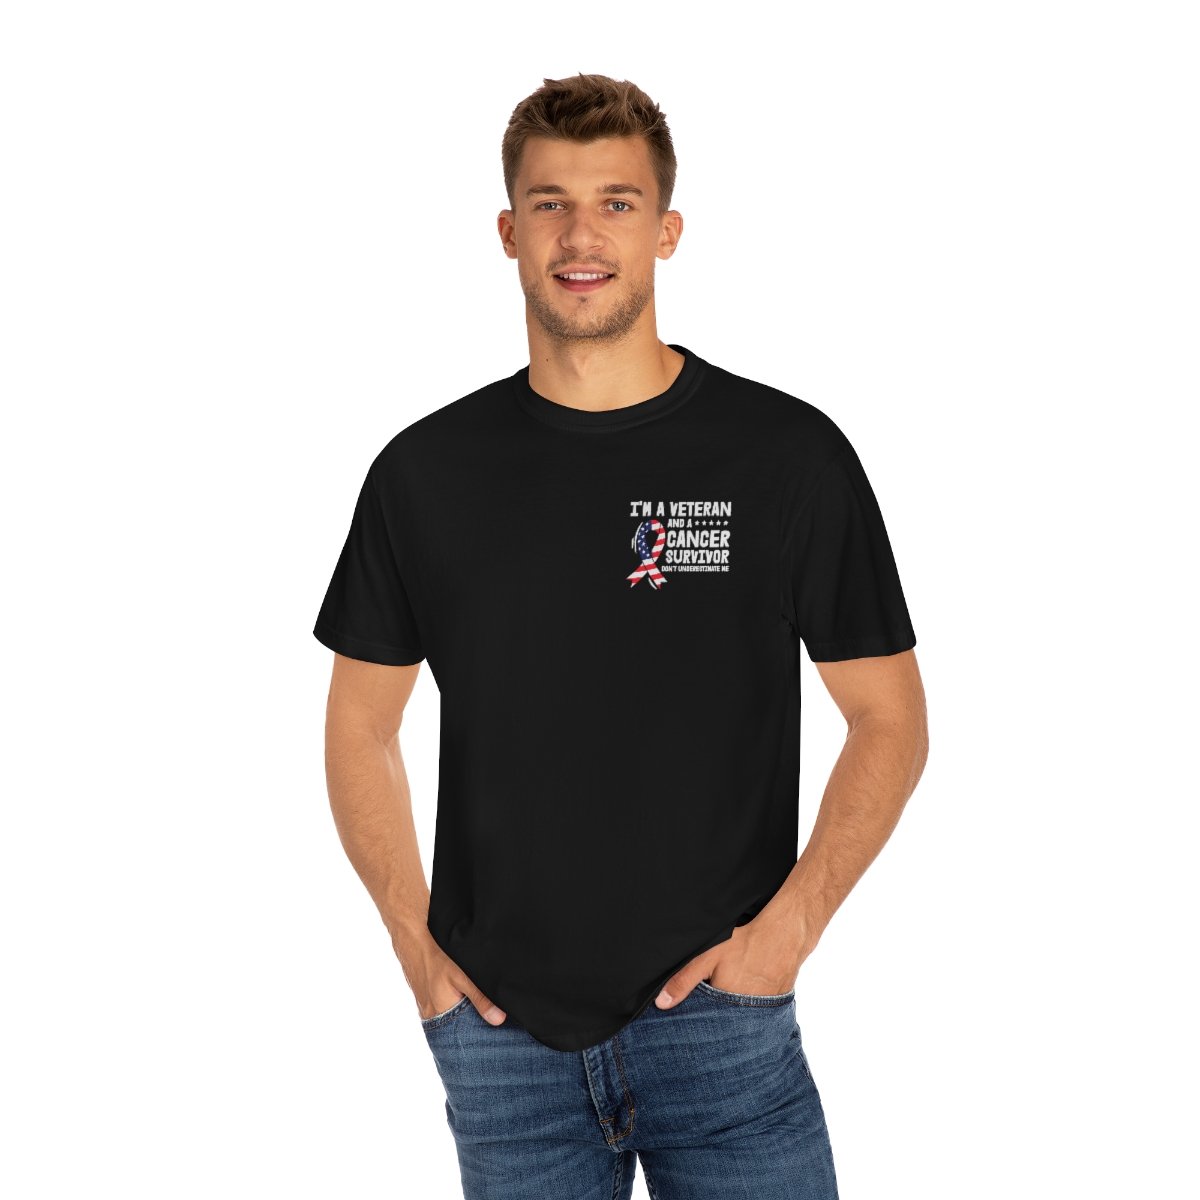 I'm A Veteran and a Cancer Survivor Don't Underestimate Me - Unisex - Garment-Dyed - Dark Colors - T-shirt